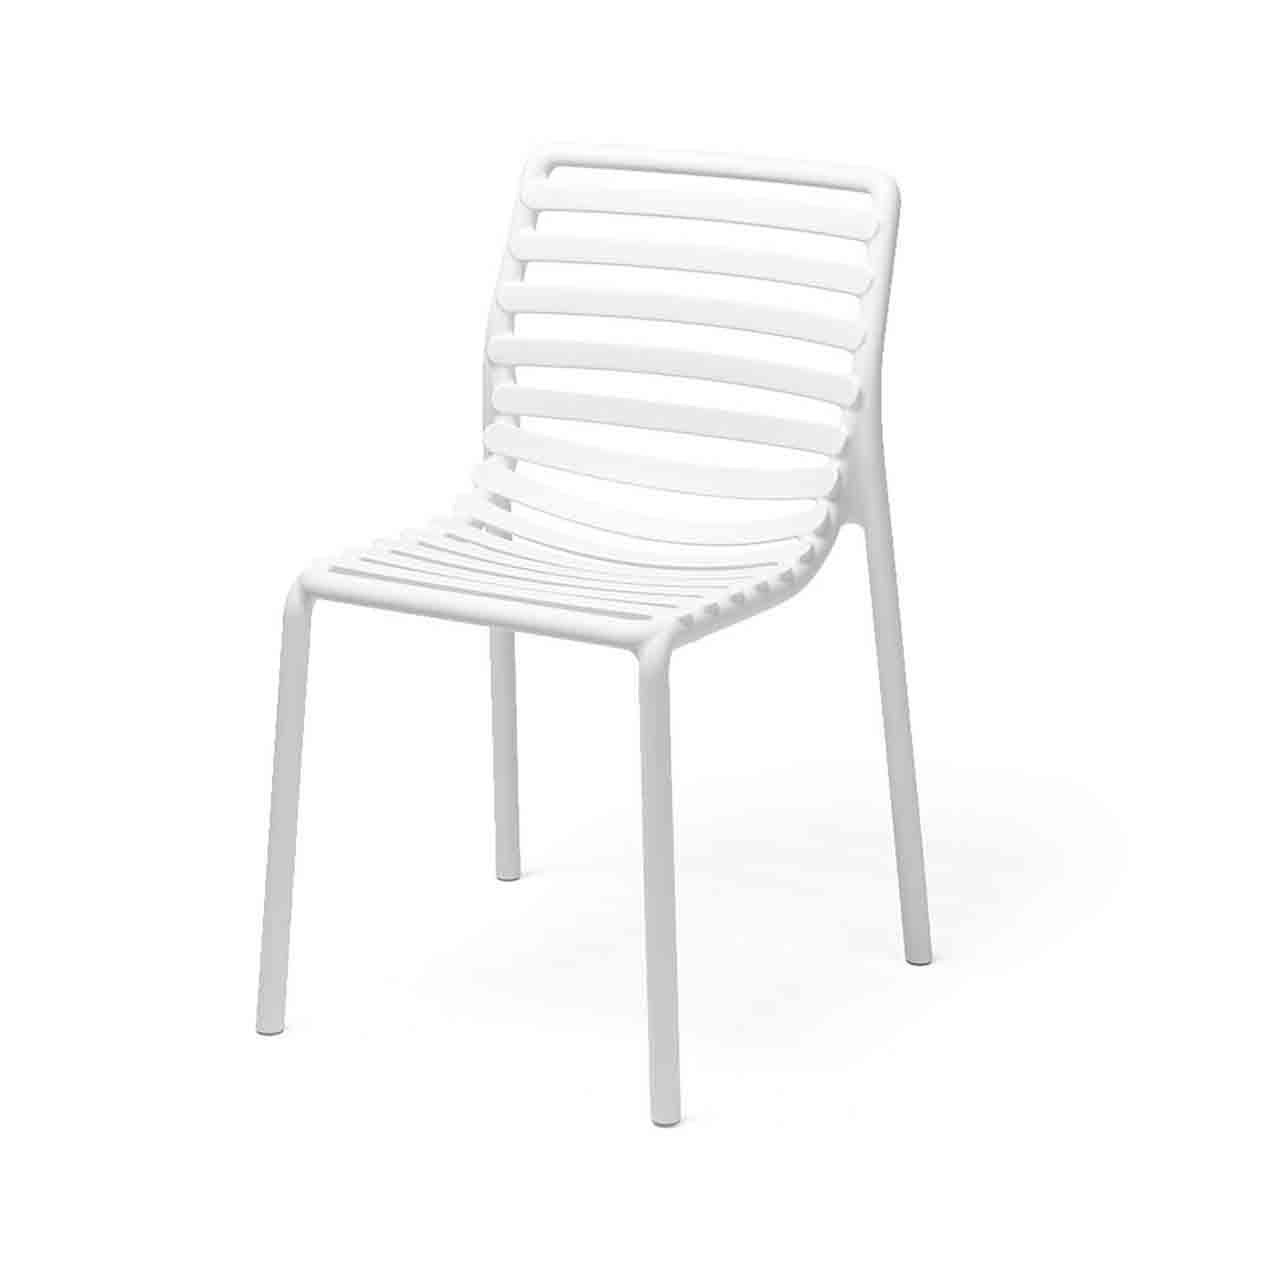 Outdoor Resin Occasional Chairs